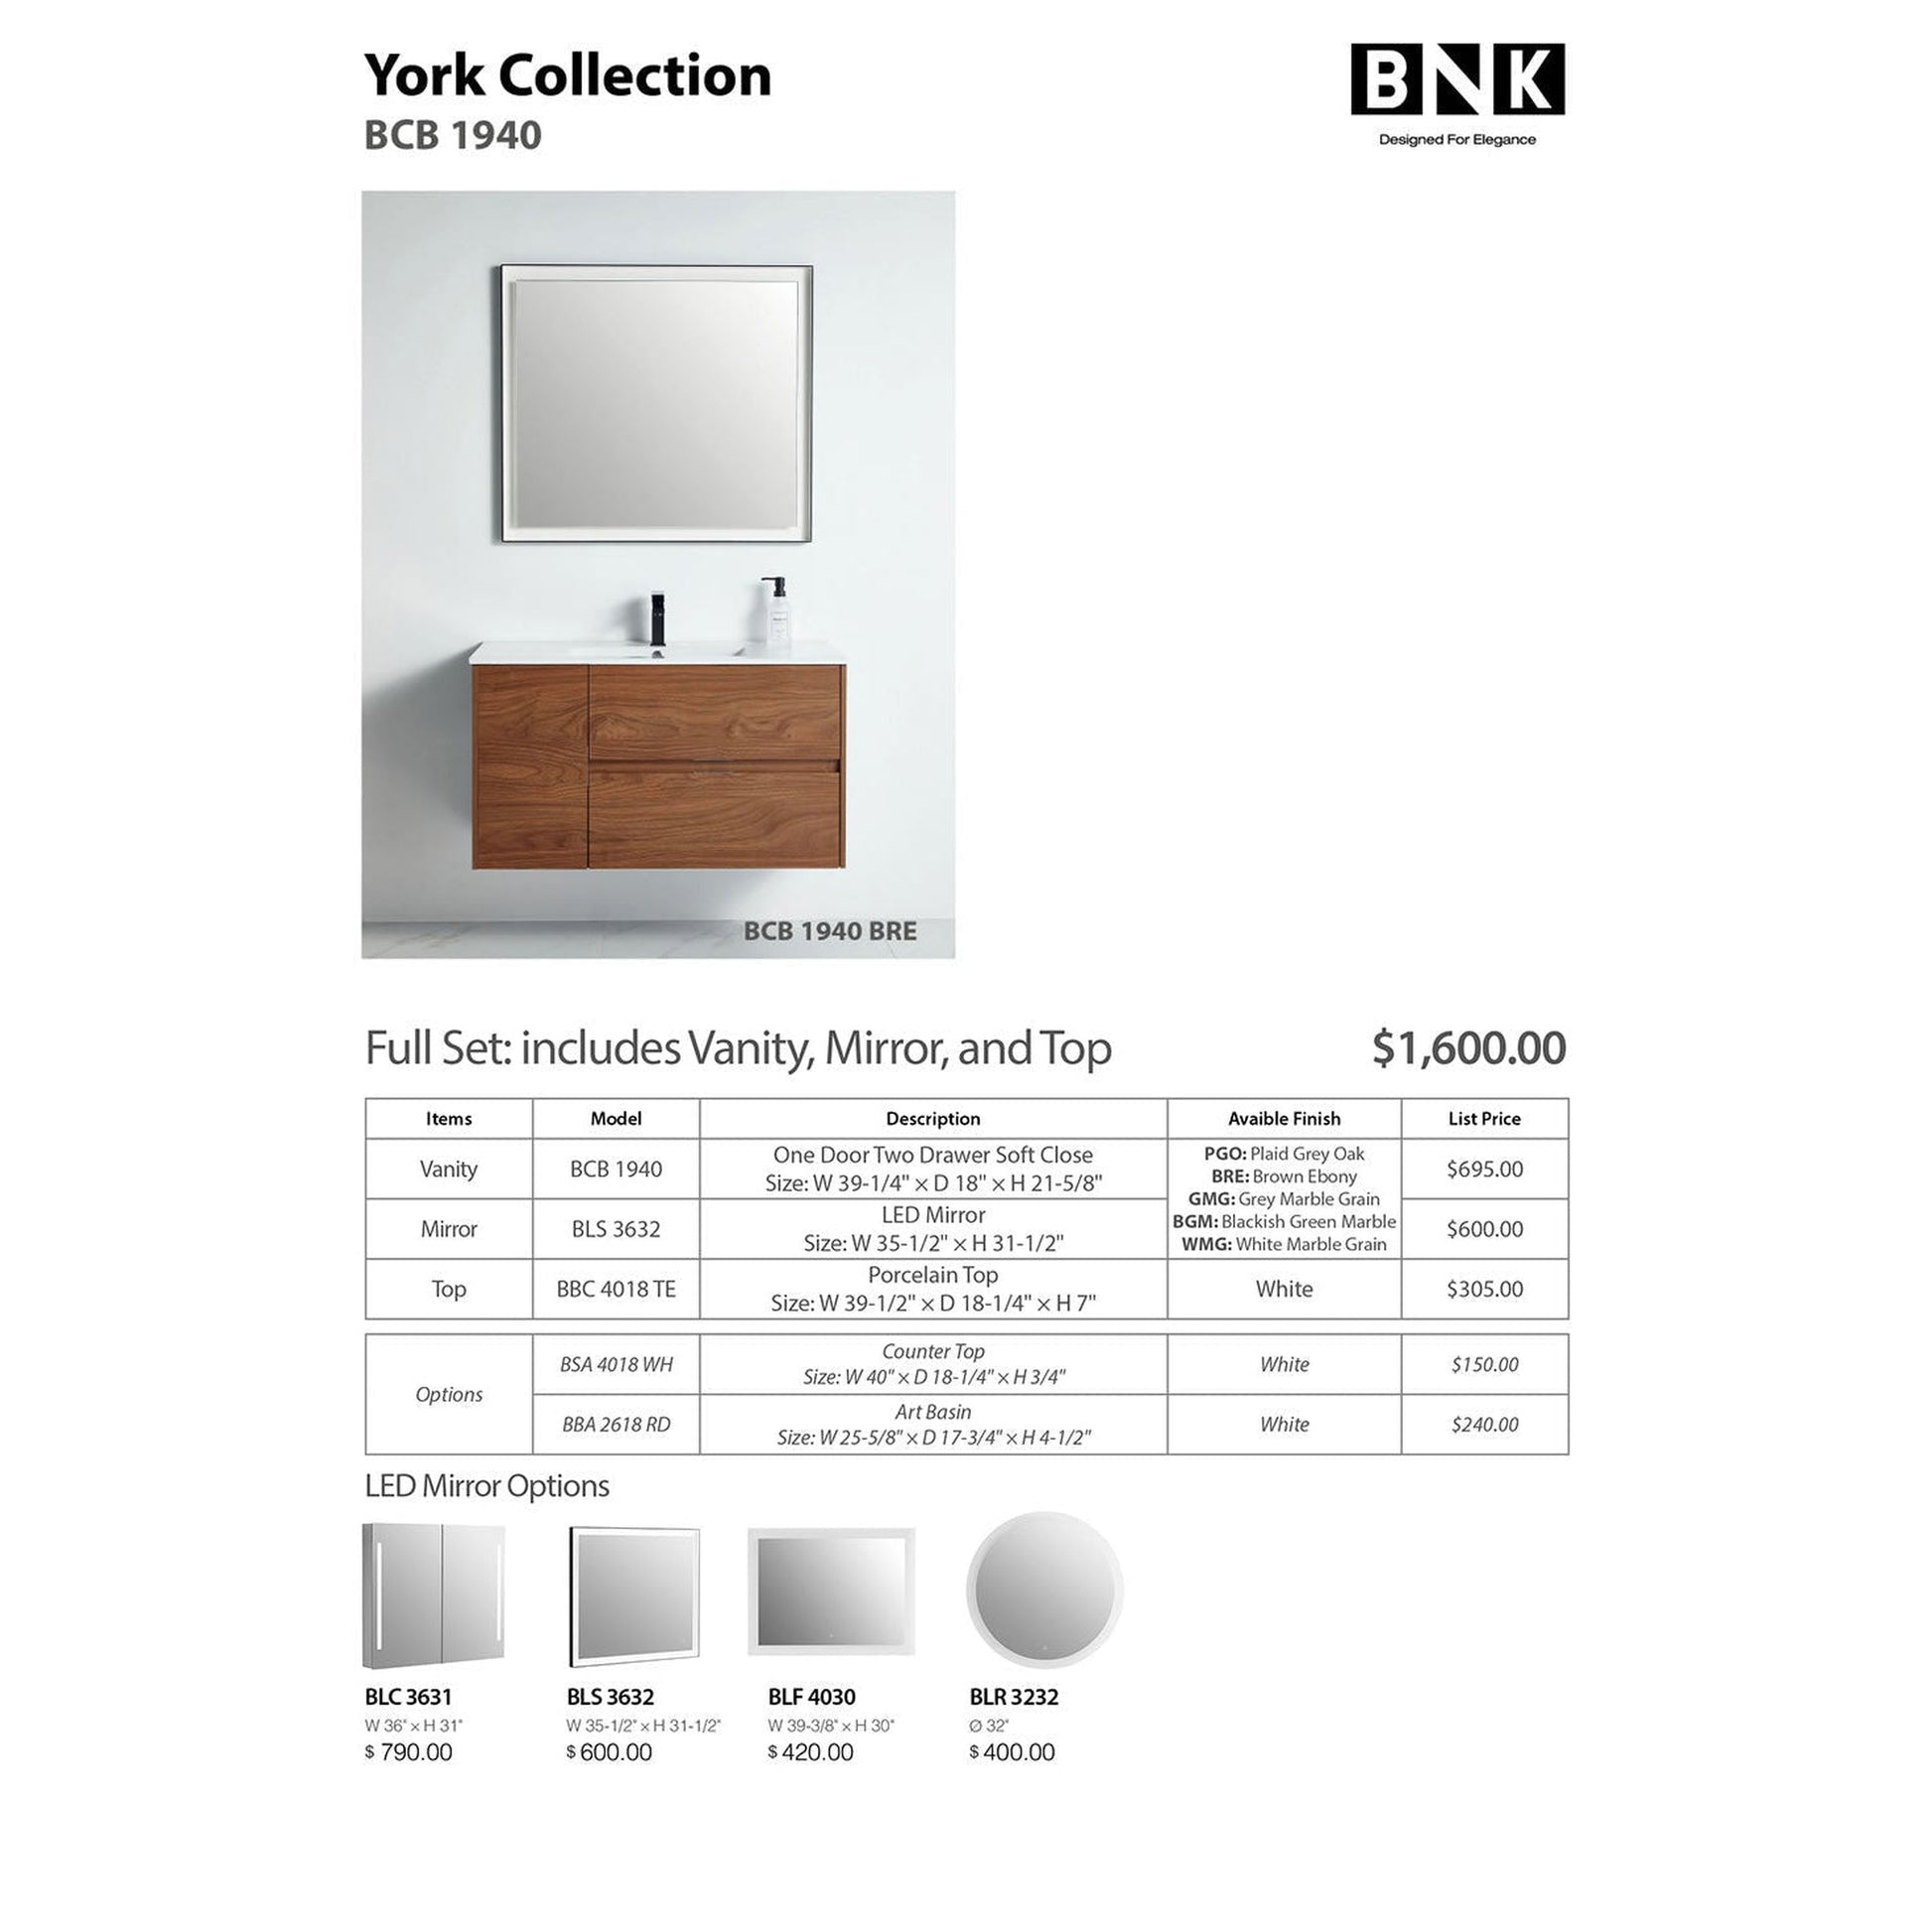 BNK BCB1940BRE York Brown Ebony Vanity Only One-Door Two Drawer Soft Close